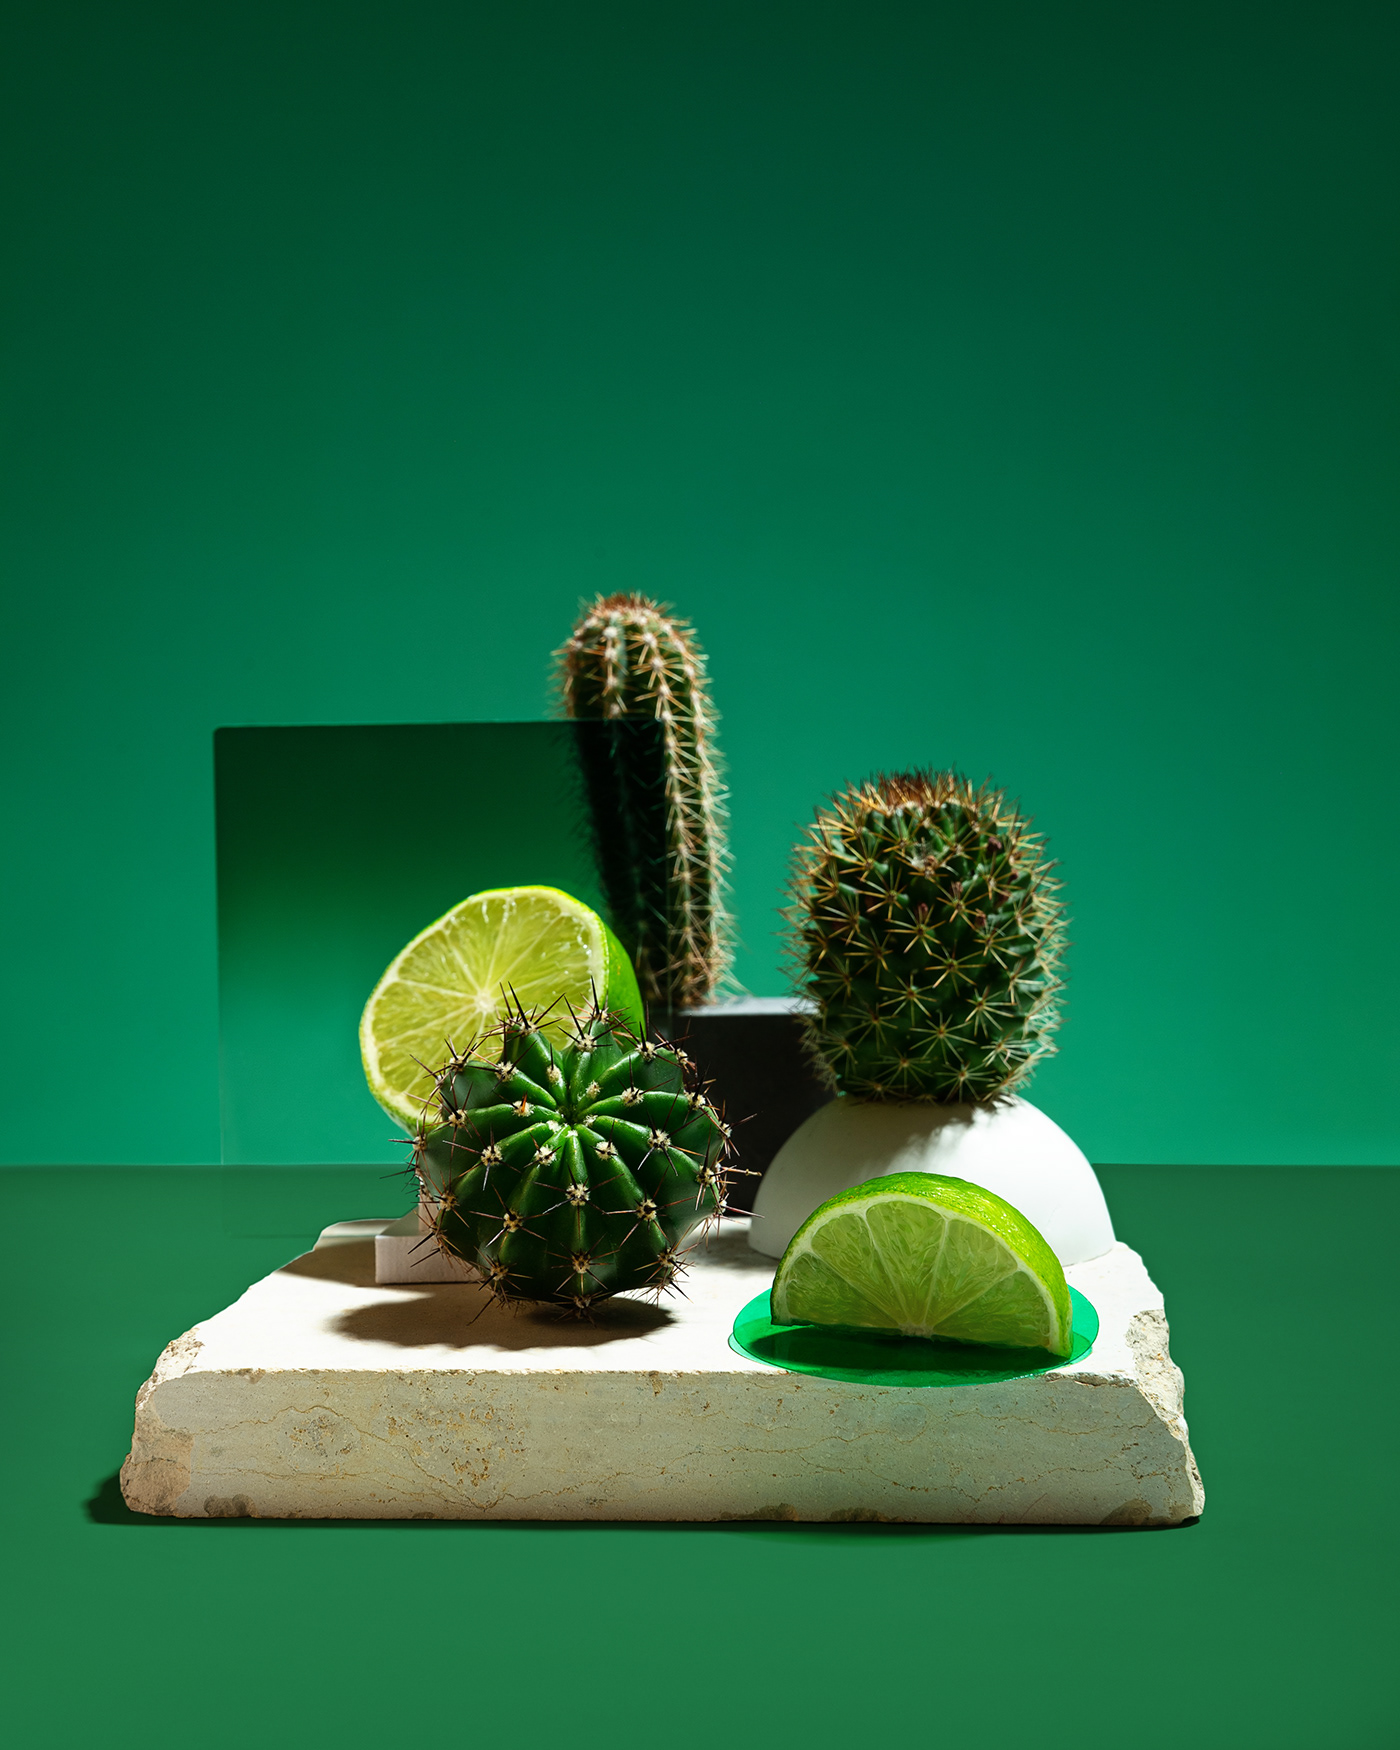 lime cactus tonic green eco product Product Photography set design  Food  food photography